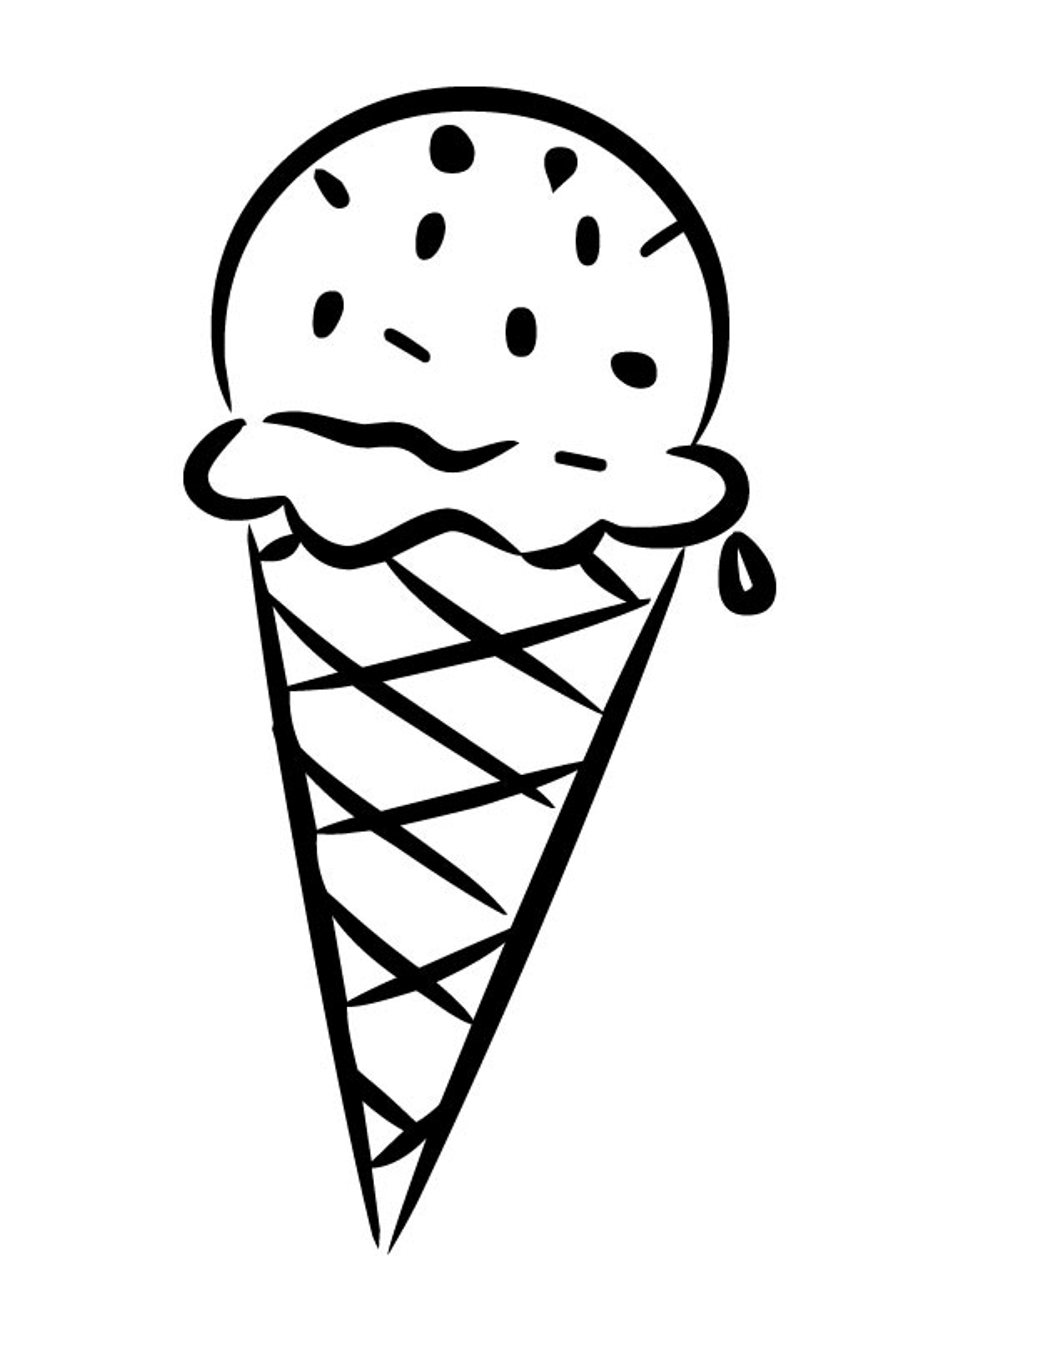 Ice Cream Cone Coloring Pages For Kids | Coloring Page Ideas